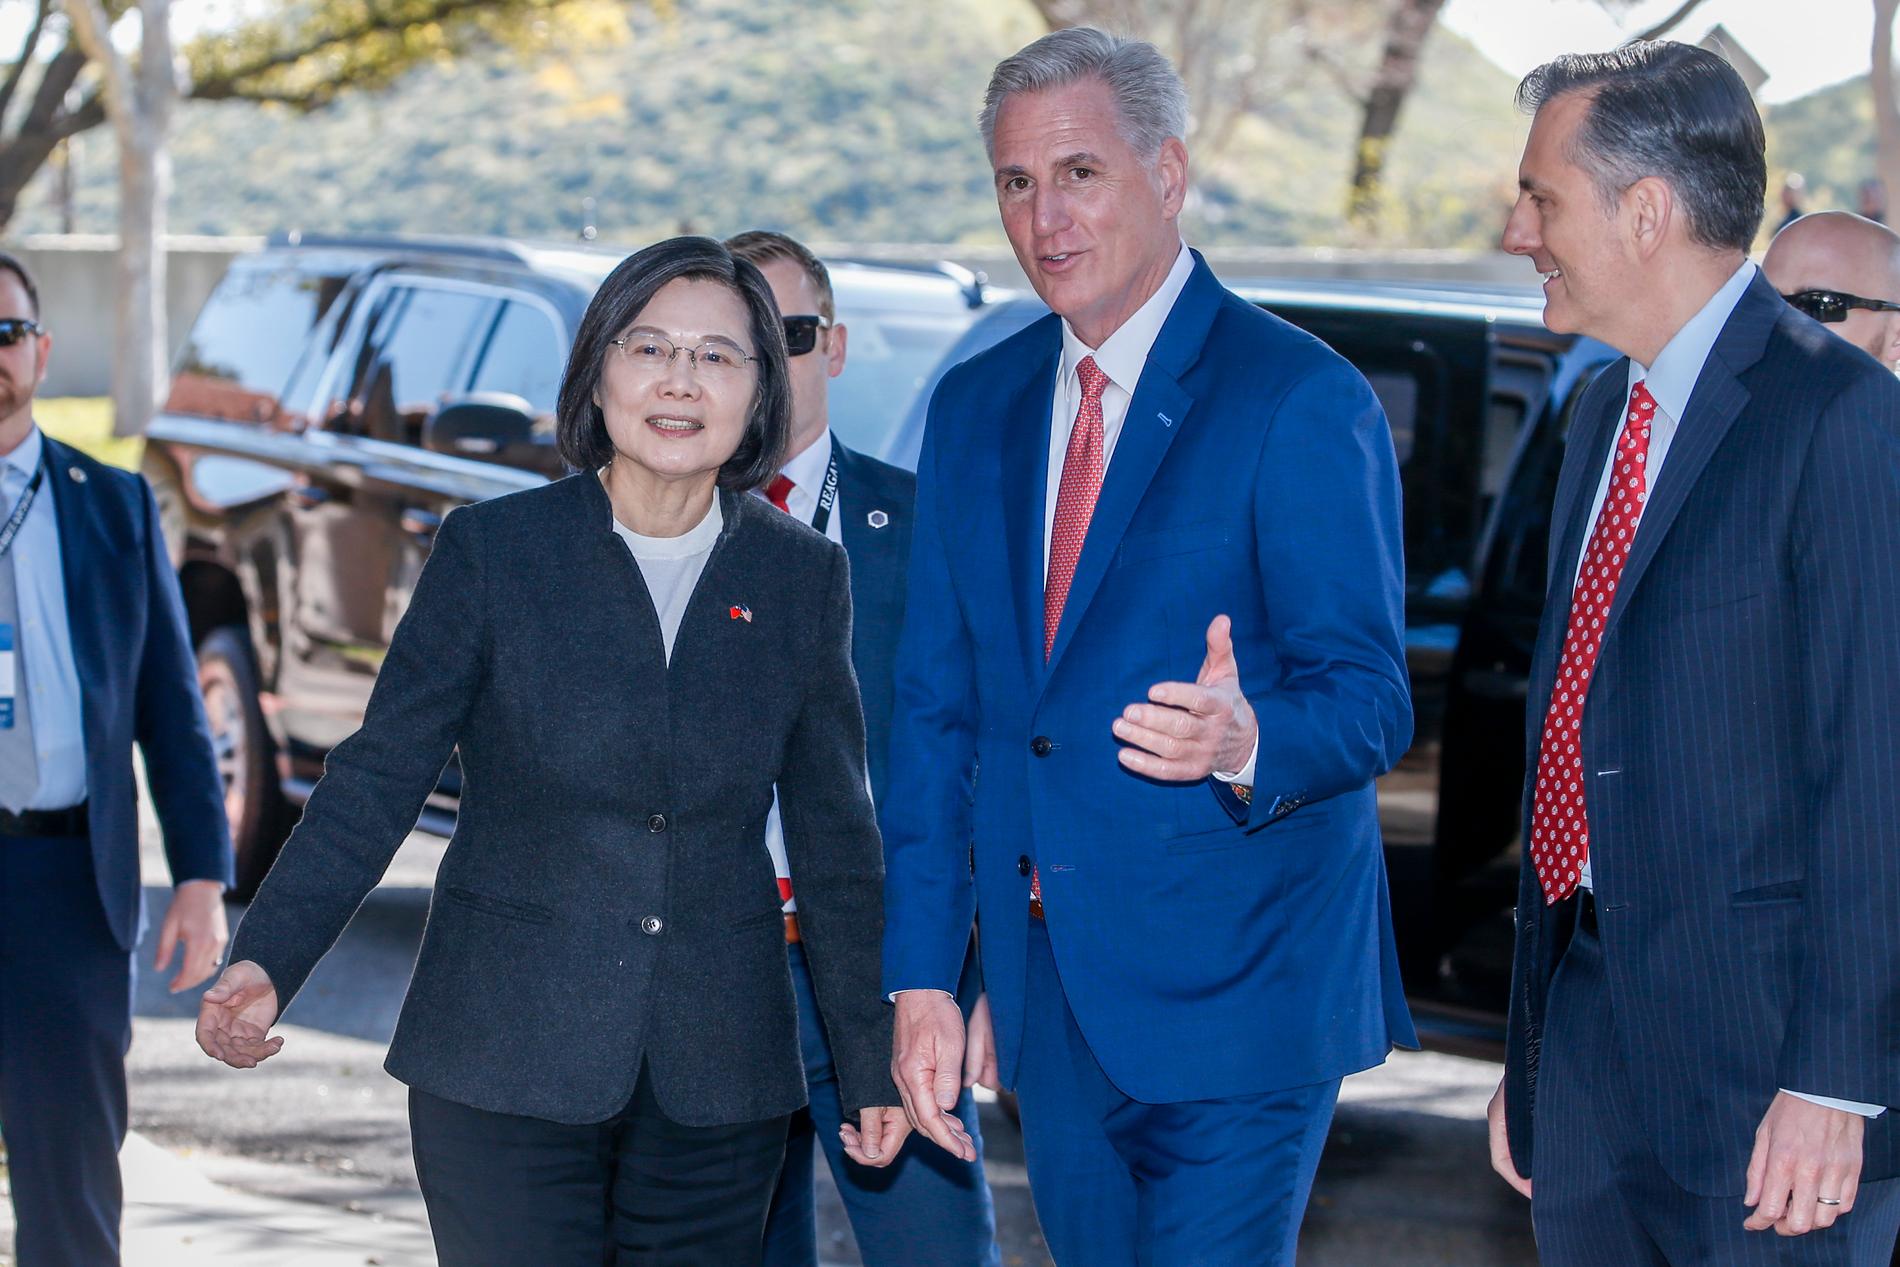 The President of Taiwan in a historic meeting in California